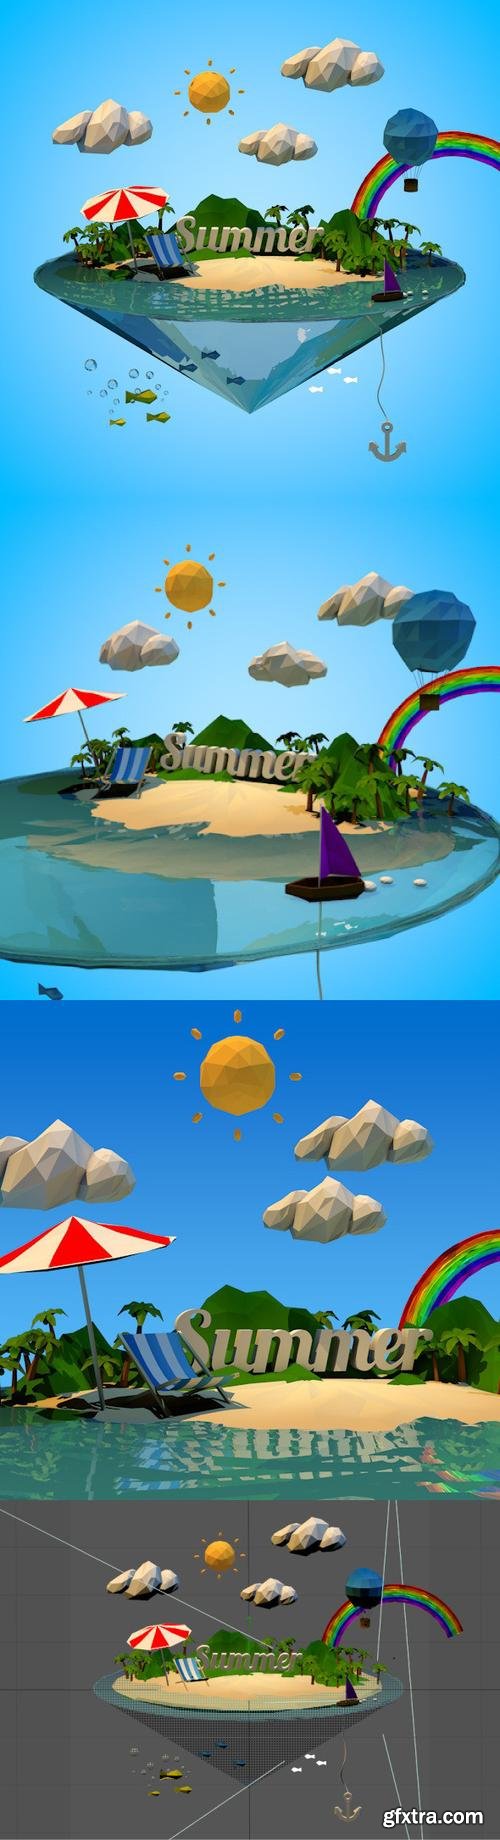 3DOcean - Abstract summer vacation with Low-poly style - 8241008